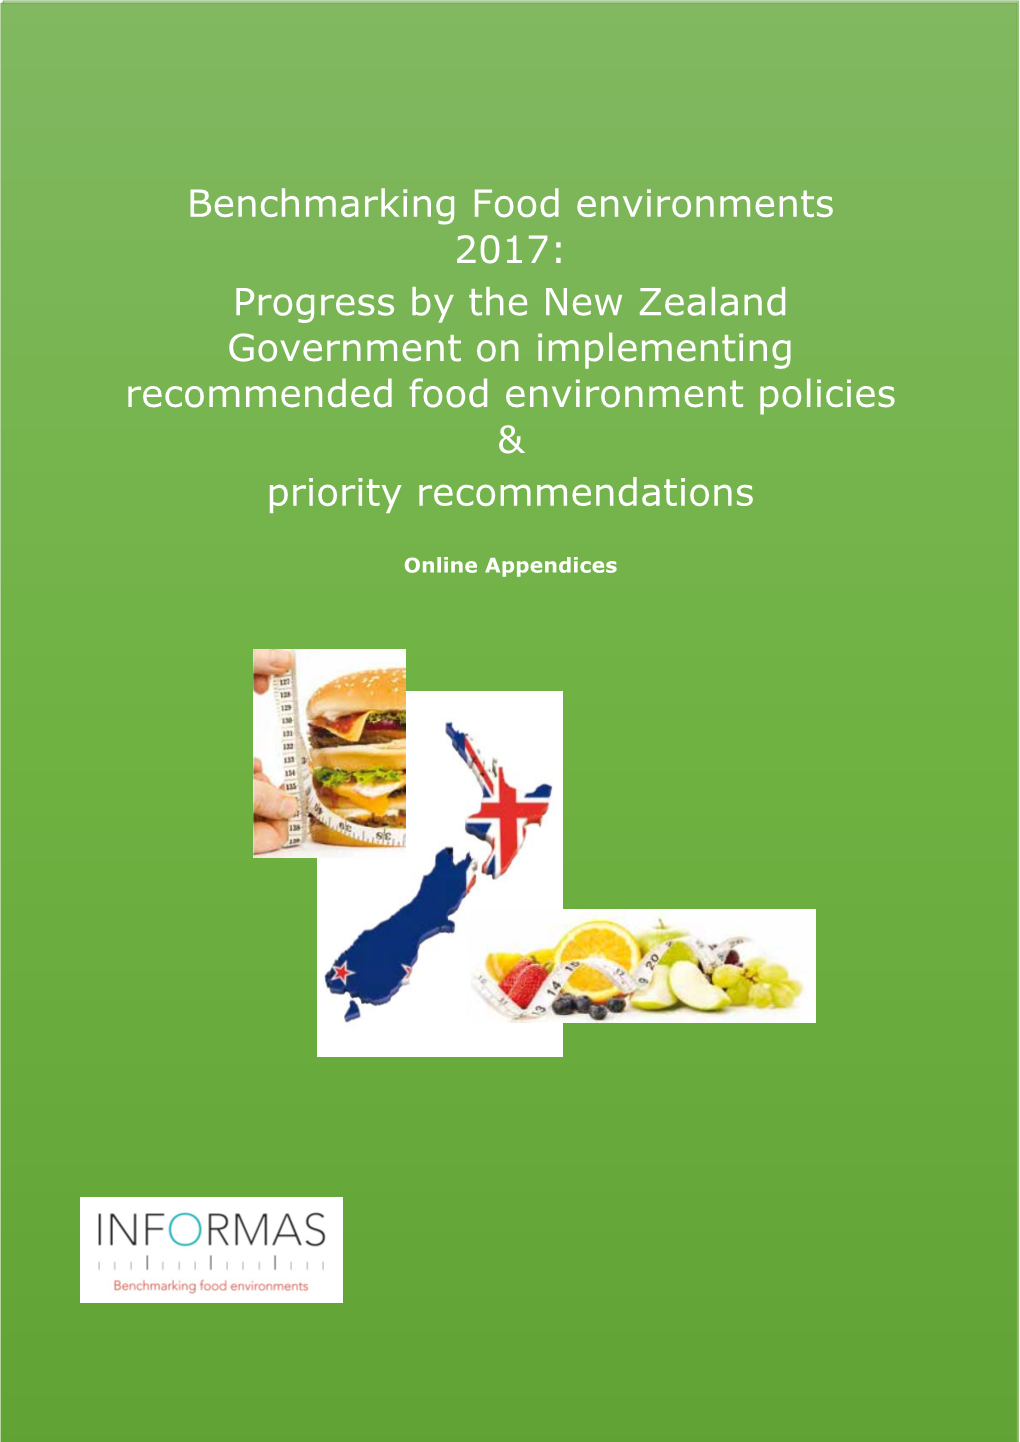 Progress by the New Zealand Government on Implementing Recommended Food Environment Policies & Priority Recommendations